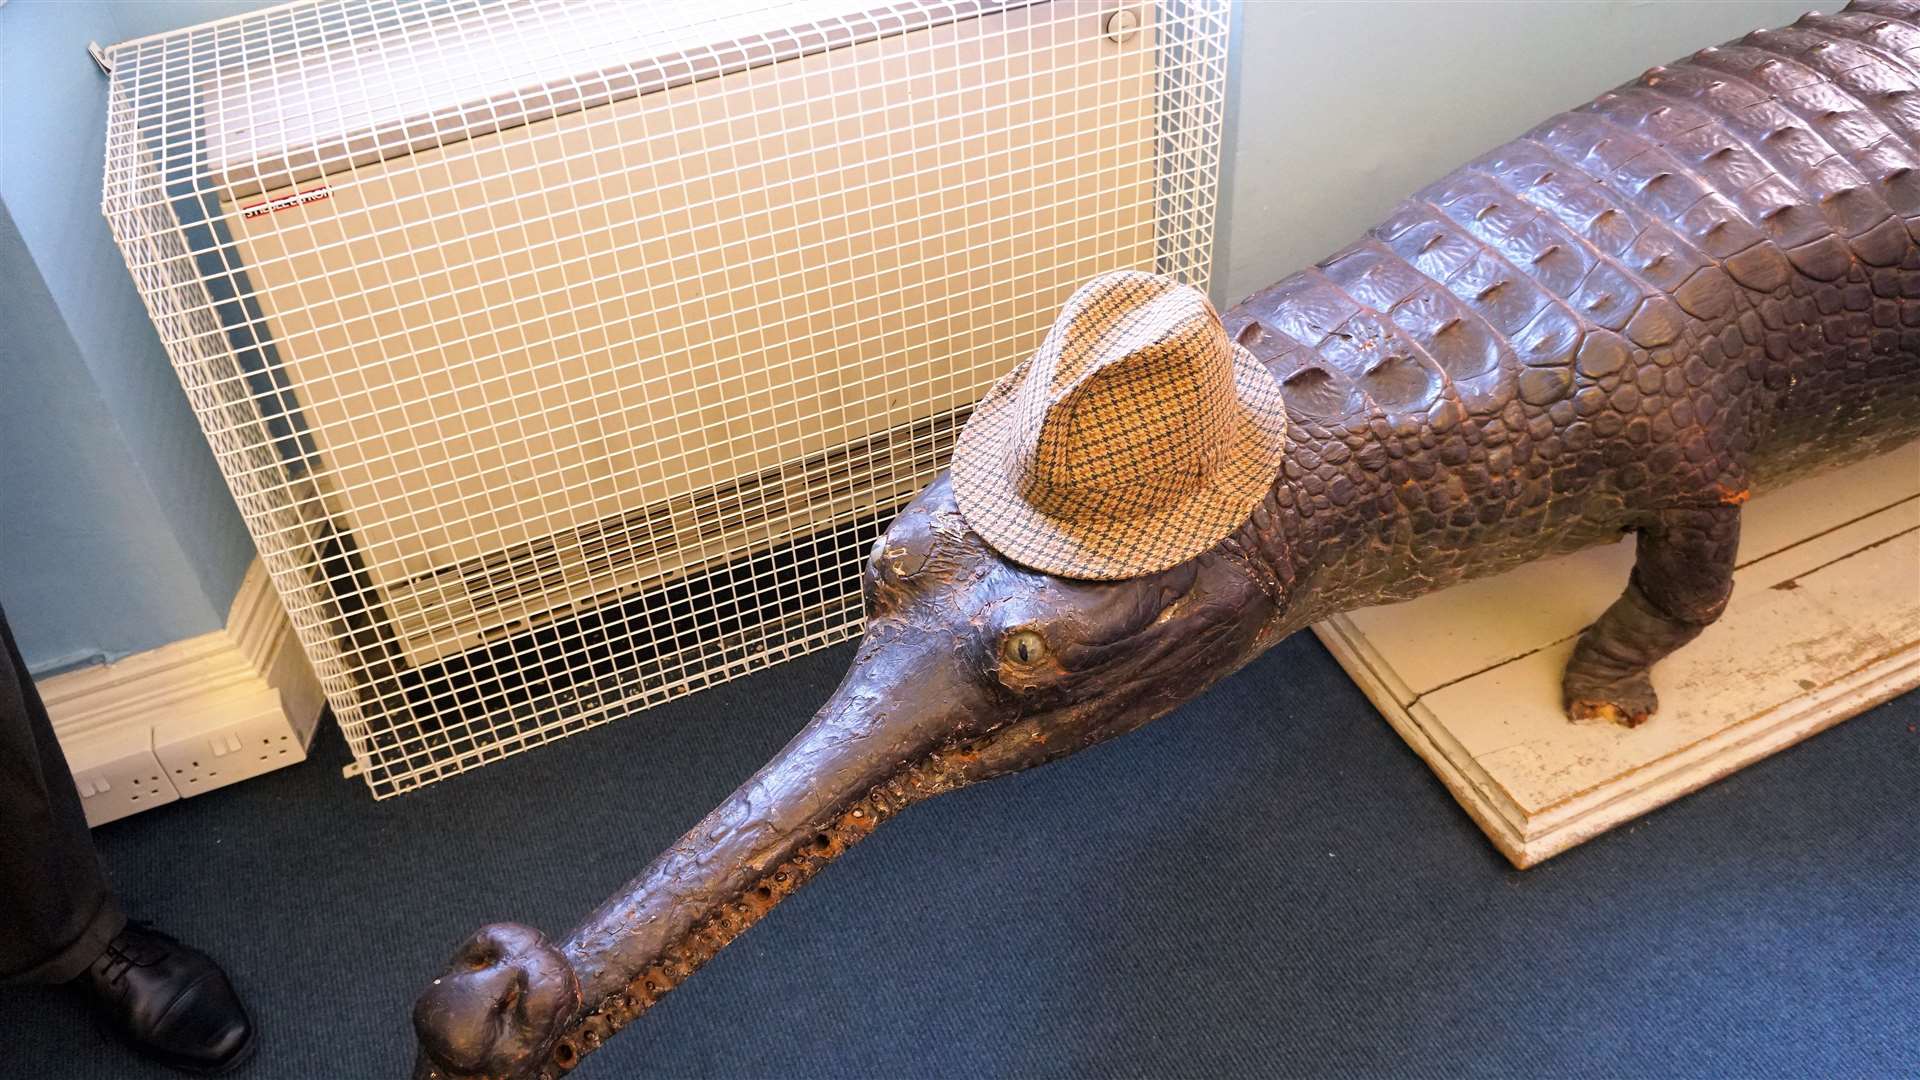 The well-kent crocodile from the former library was at the event too. Picture: DGS